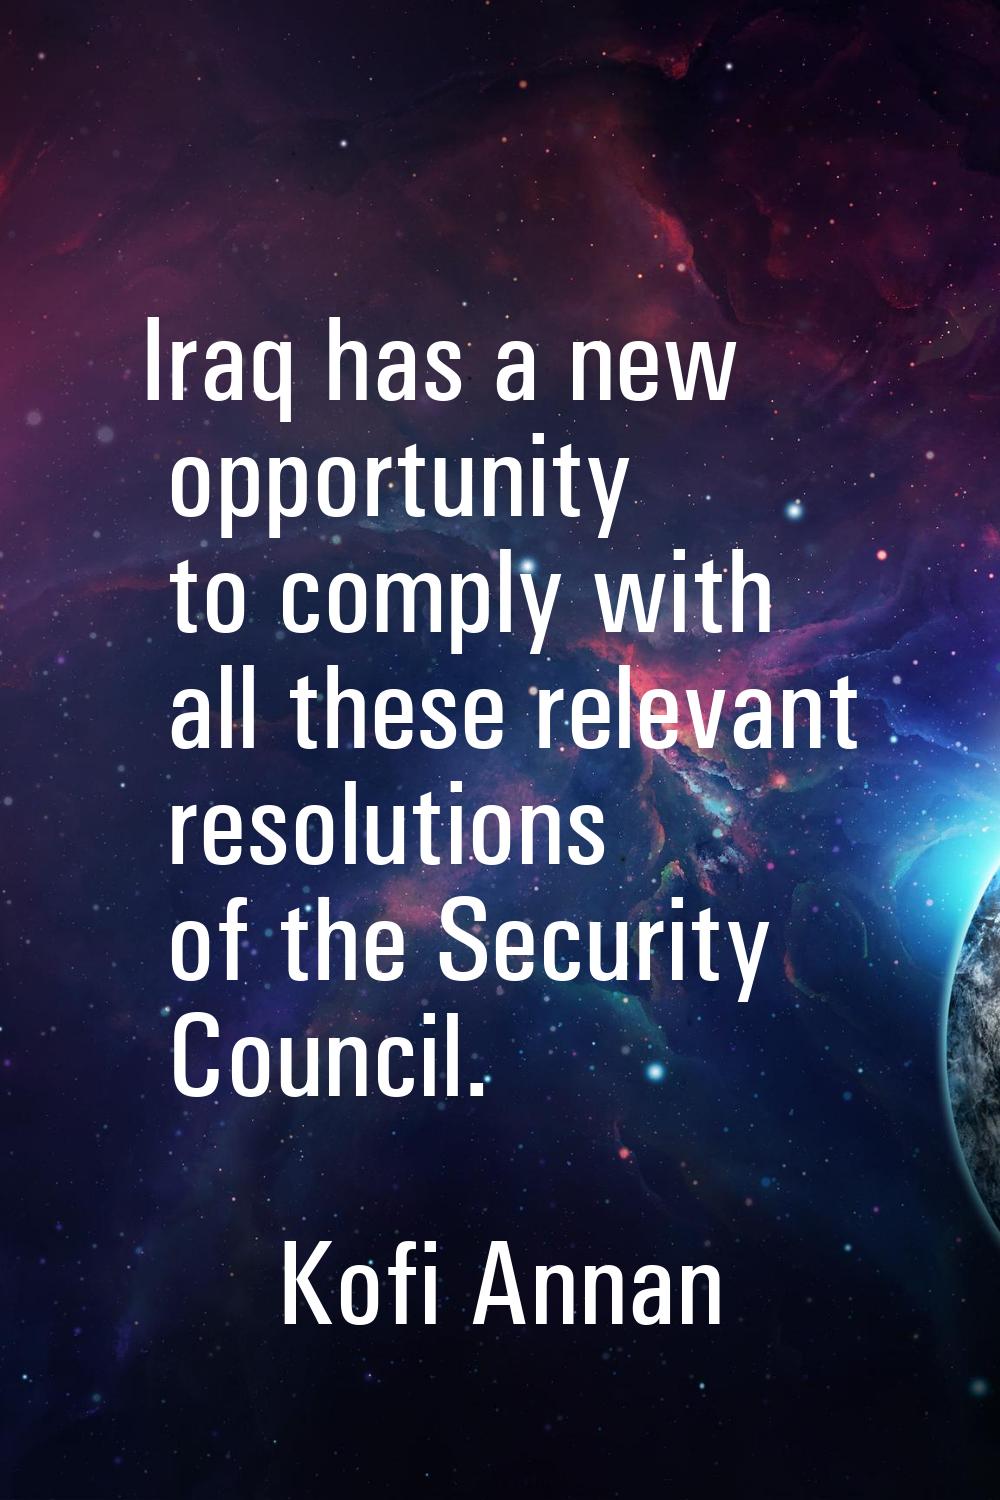 Iraq has a new opportunity to comply with all these relevant resolutions of the Security Council.